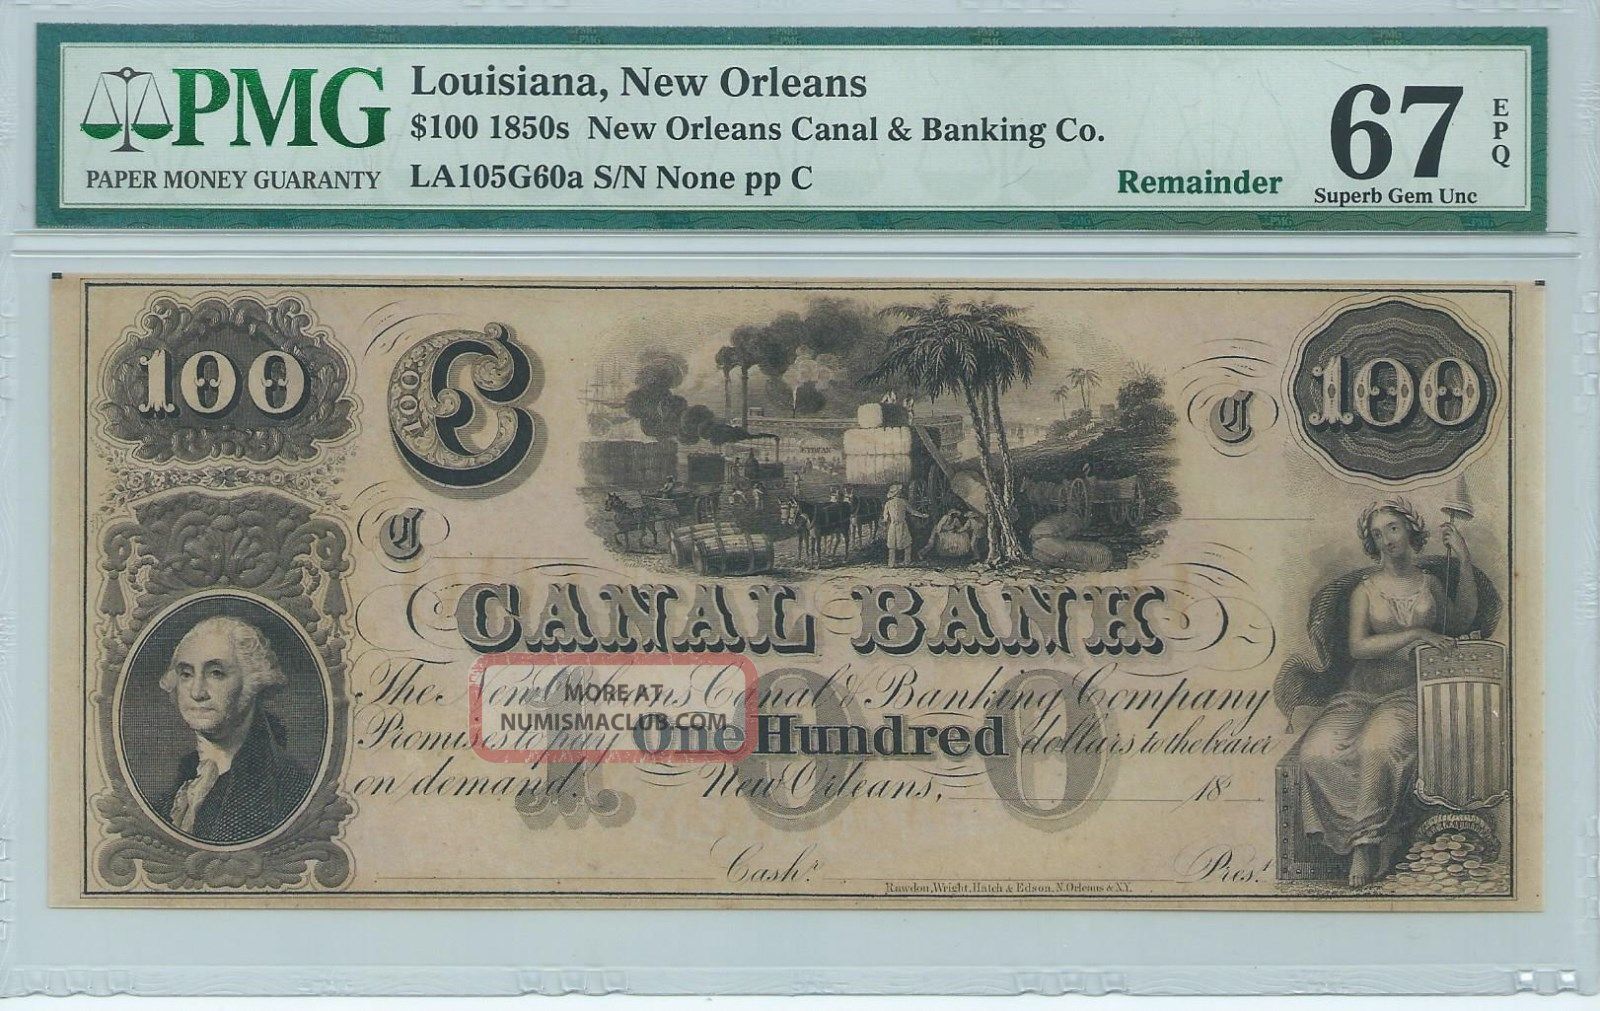 Louisiana Orleans Canal And Banking Co. $100 185x G60a Pmg 67 Epq